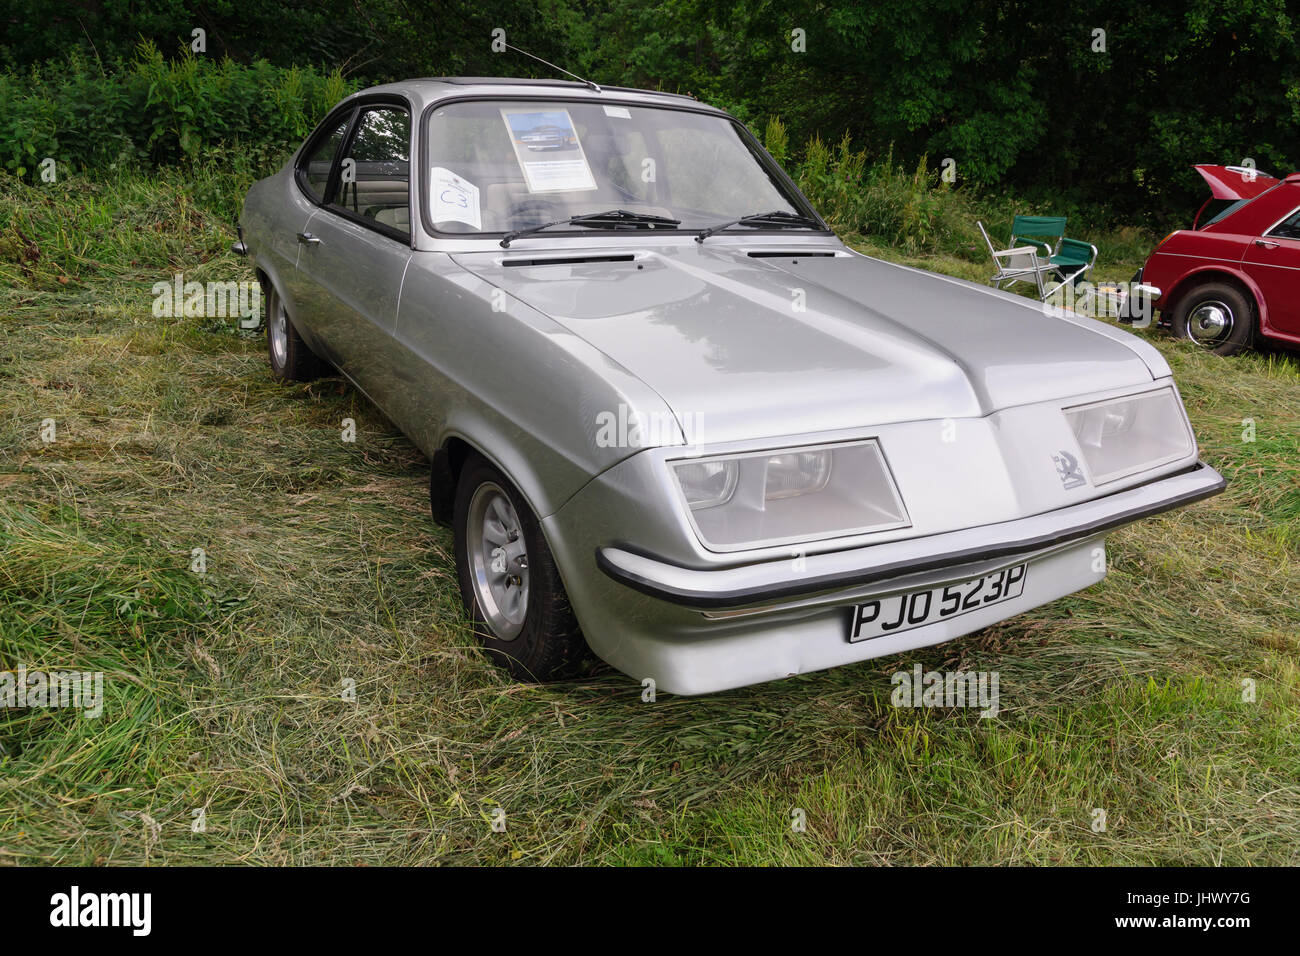 Vauxhall or Chevrolet Firenza High Performance 2.3 litre nicknamed the Droopsnoot a sports coupe built from 1971 to 1975 Stock Photo